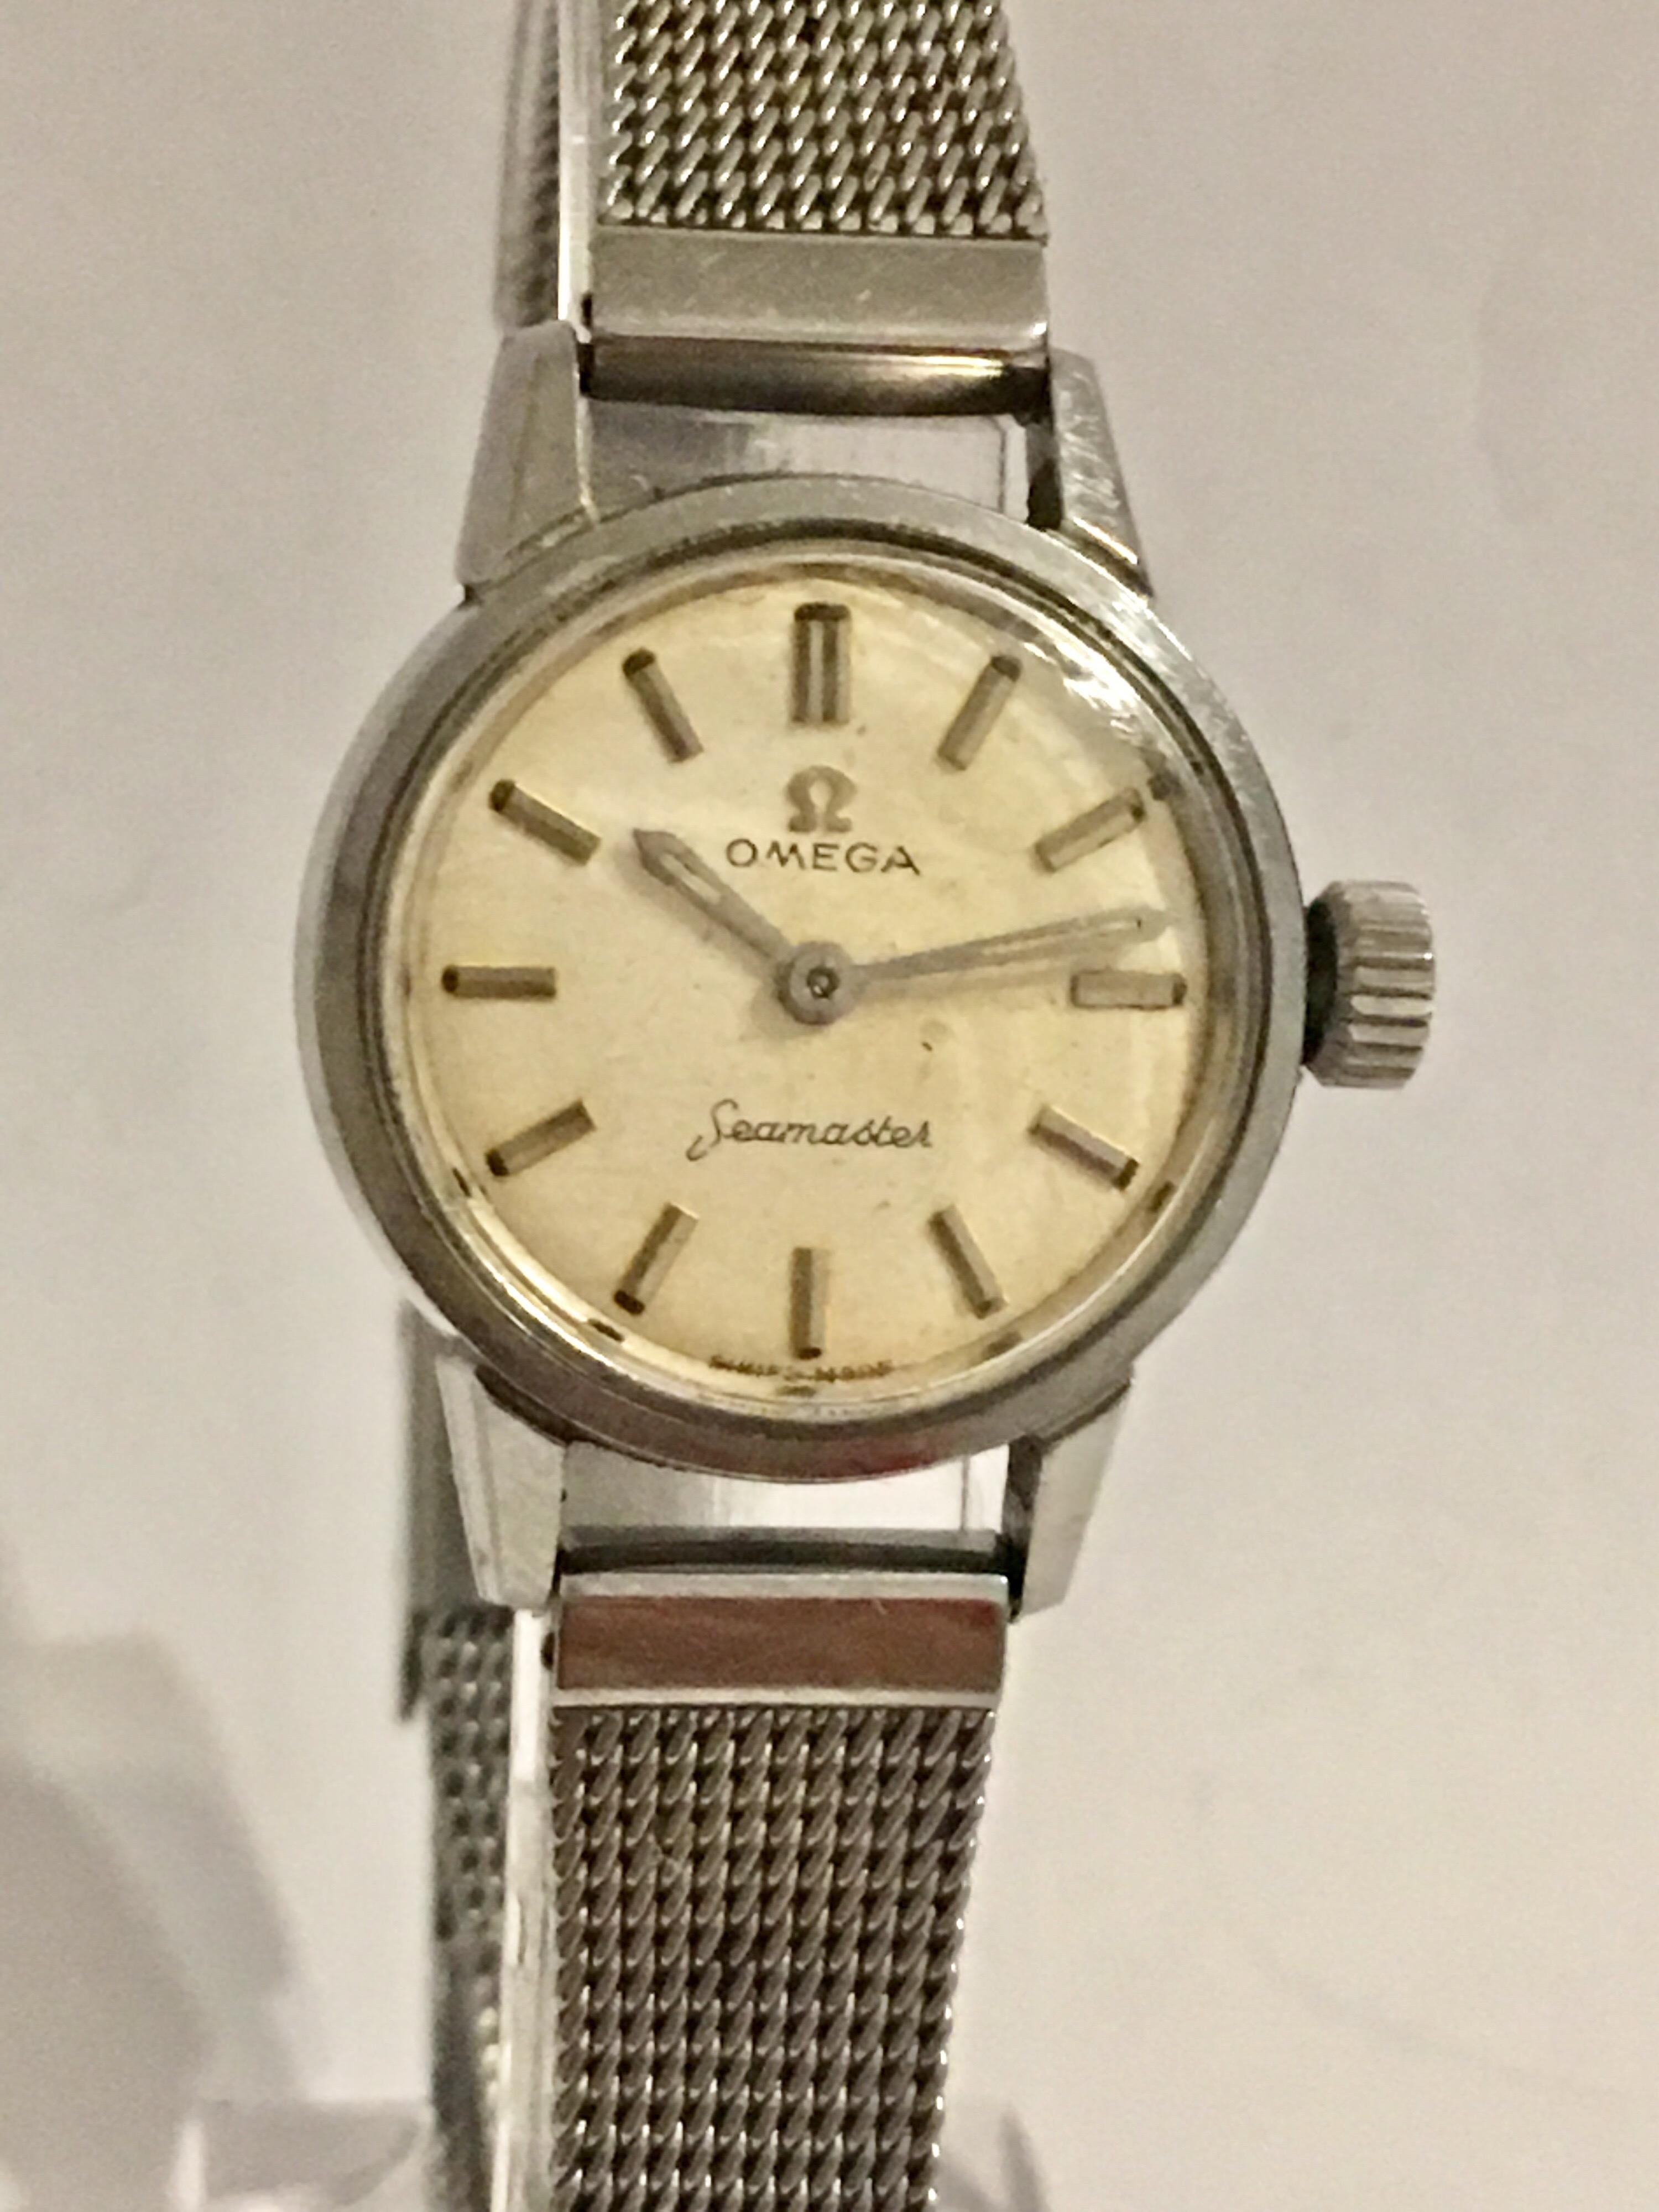 This manual winding vintage watch is working and ticking well. The dial is a bit tired and worn. Tiny scratches on the glass. Please study  the images carefully as form part of the description.